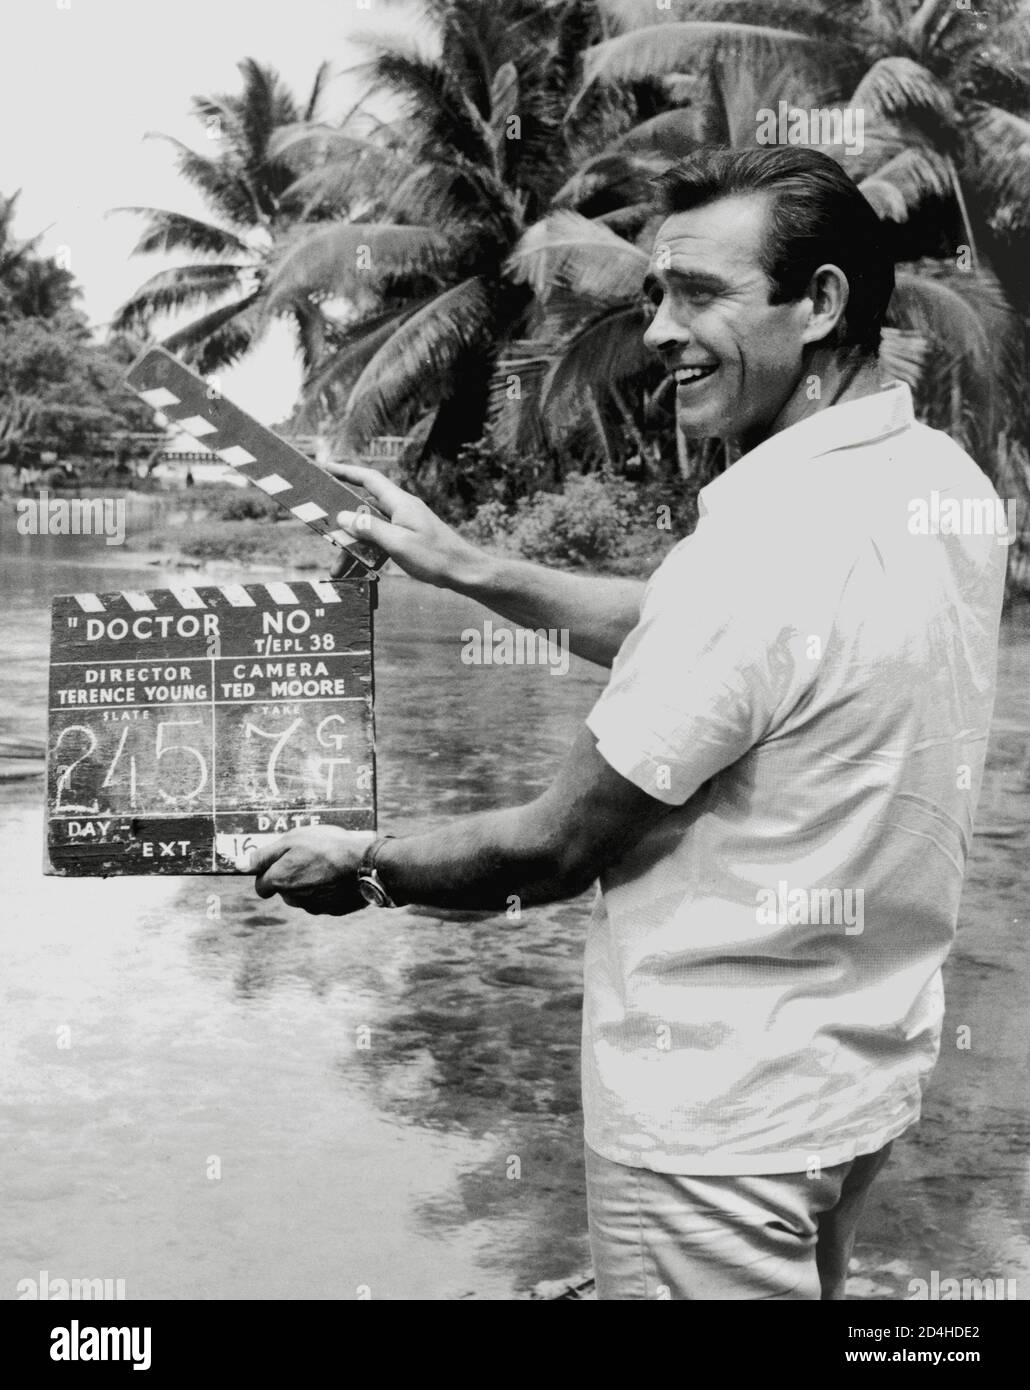 Dr No 1962 James Bond Film Sean Connery Black And White Photo Picture Poster 